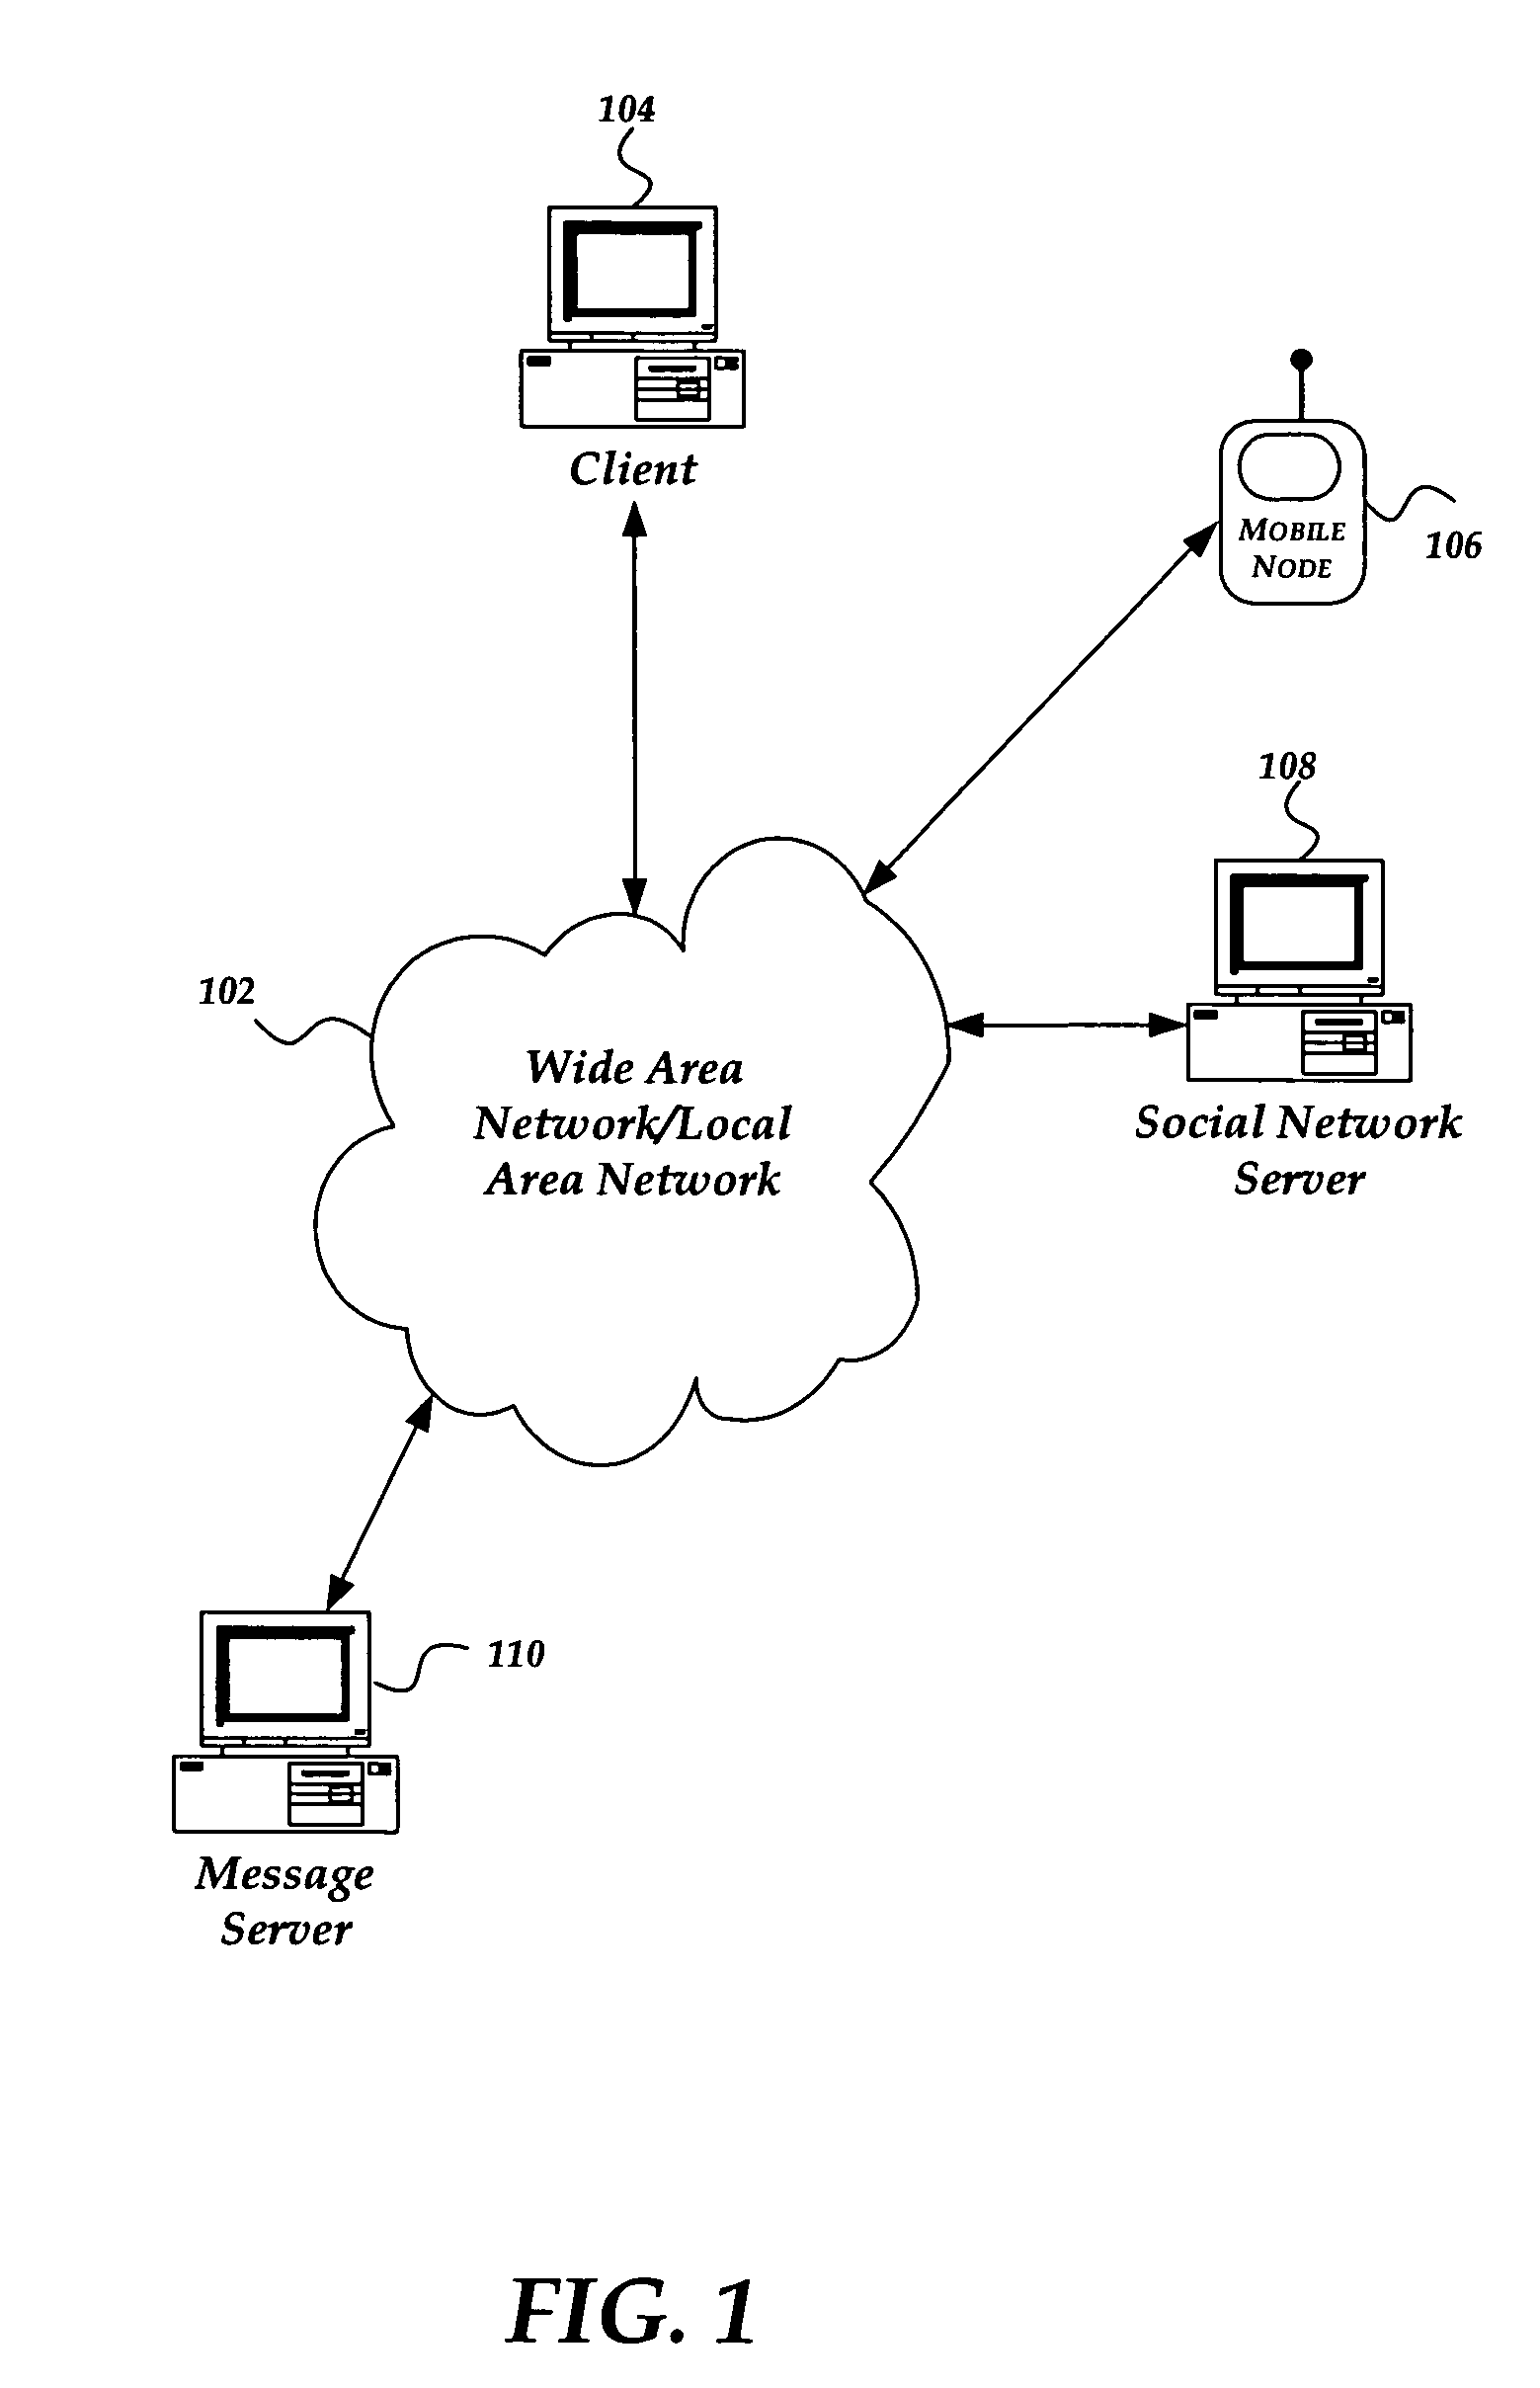 Method and system for finding related nodes in a social network